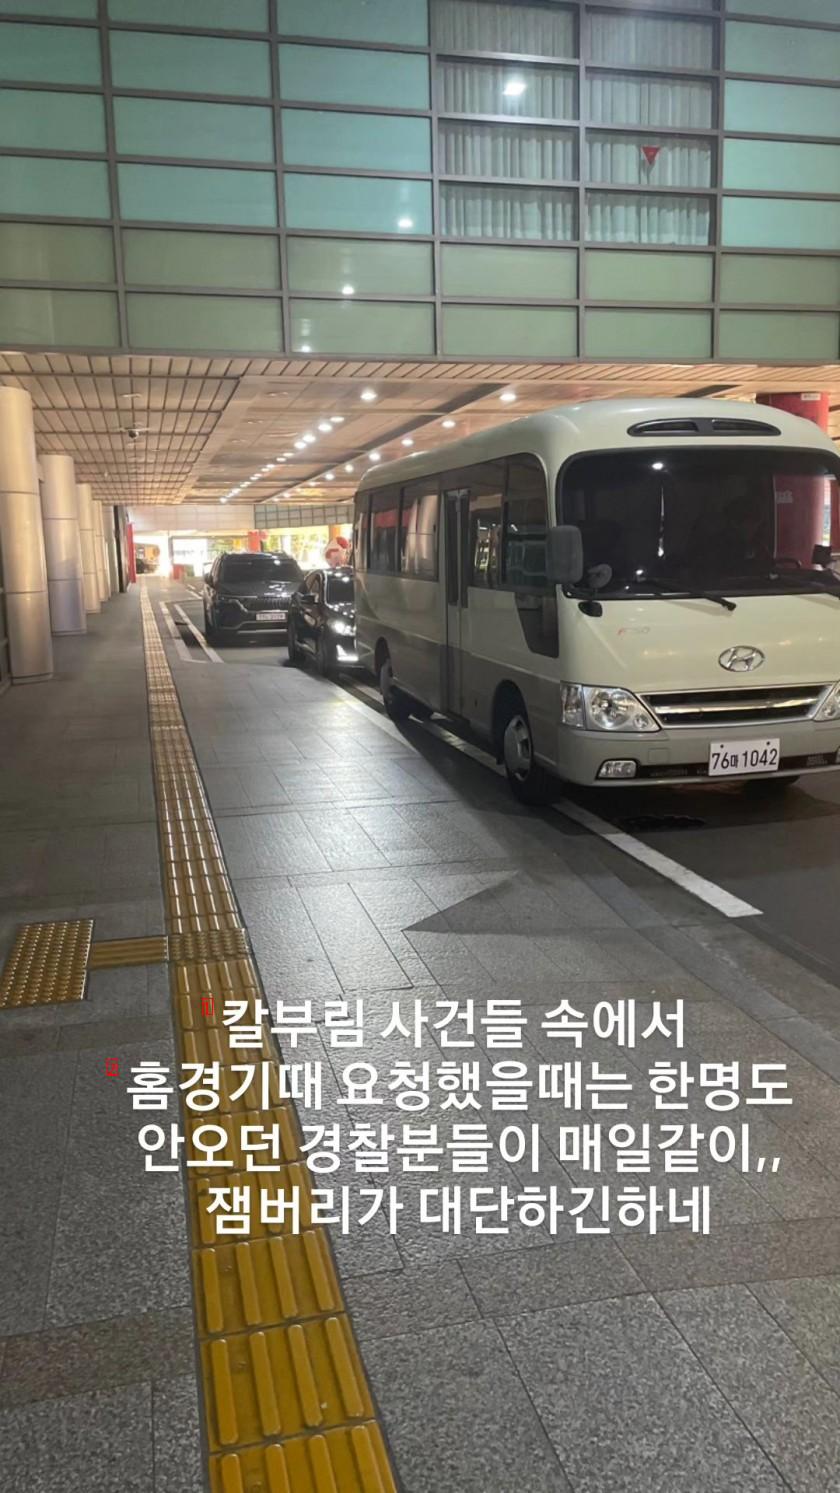 FC Seoul club employee Instagram, who seems to be shocked by Jamboree